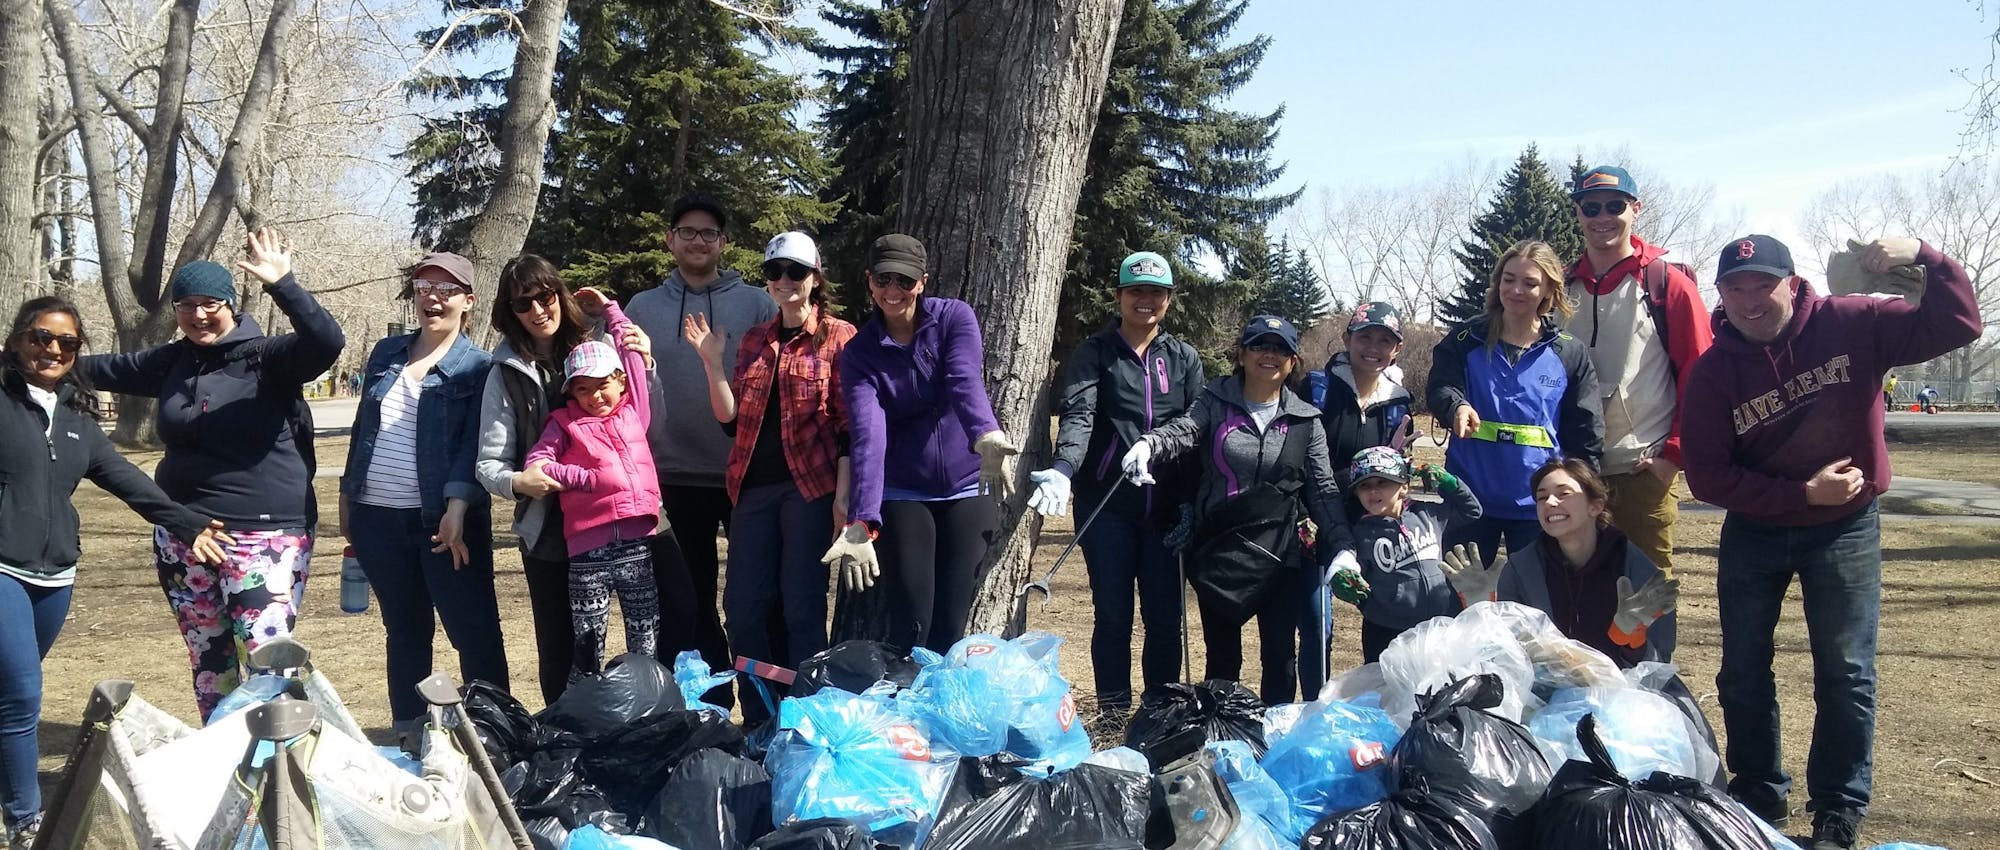 A group of people standing in front of many bags of garbage.